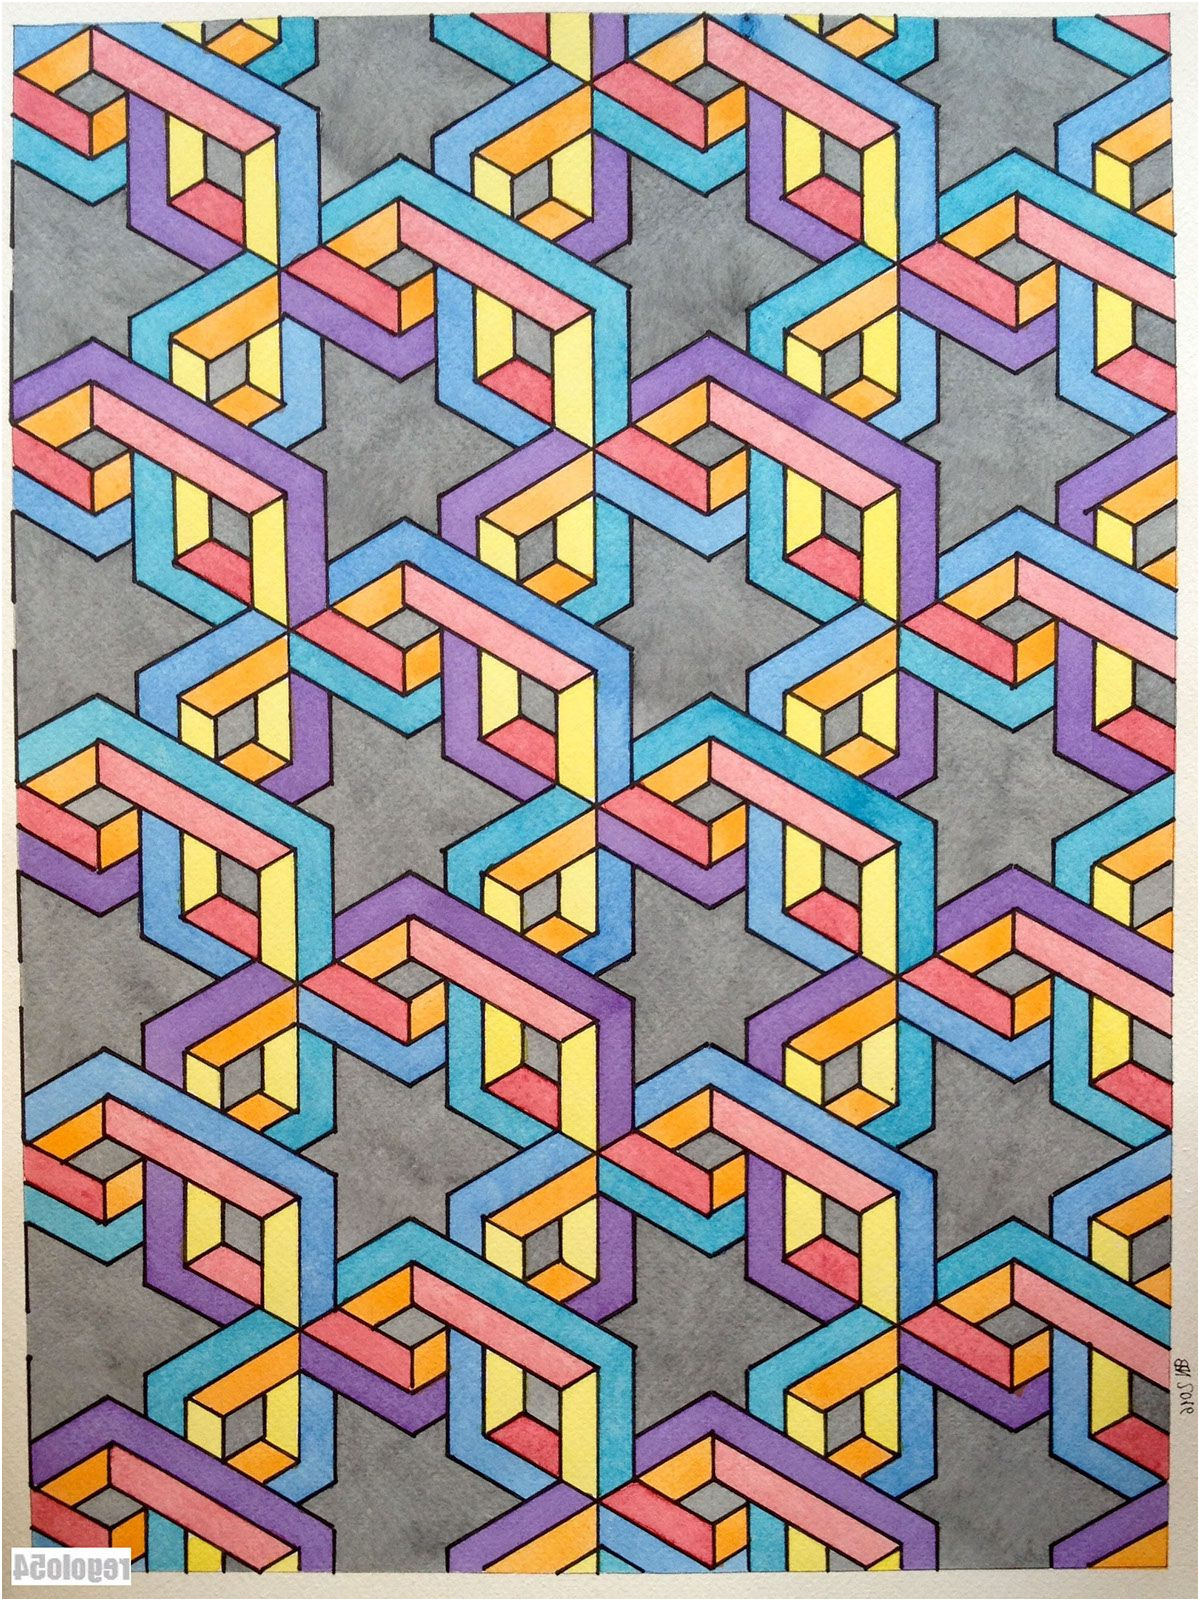 impossible on behance in 2020 geometric drawing optical illusions geometric art